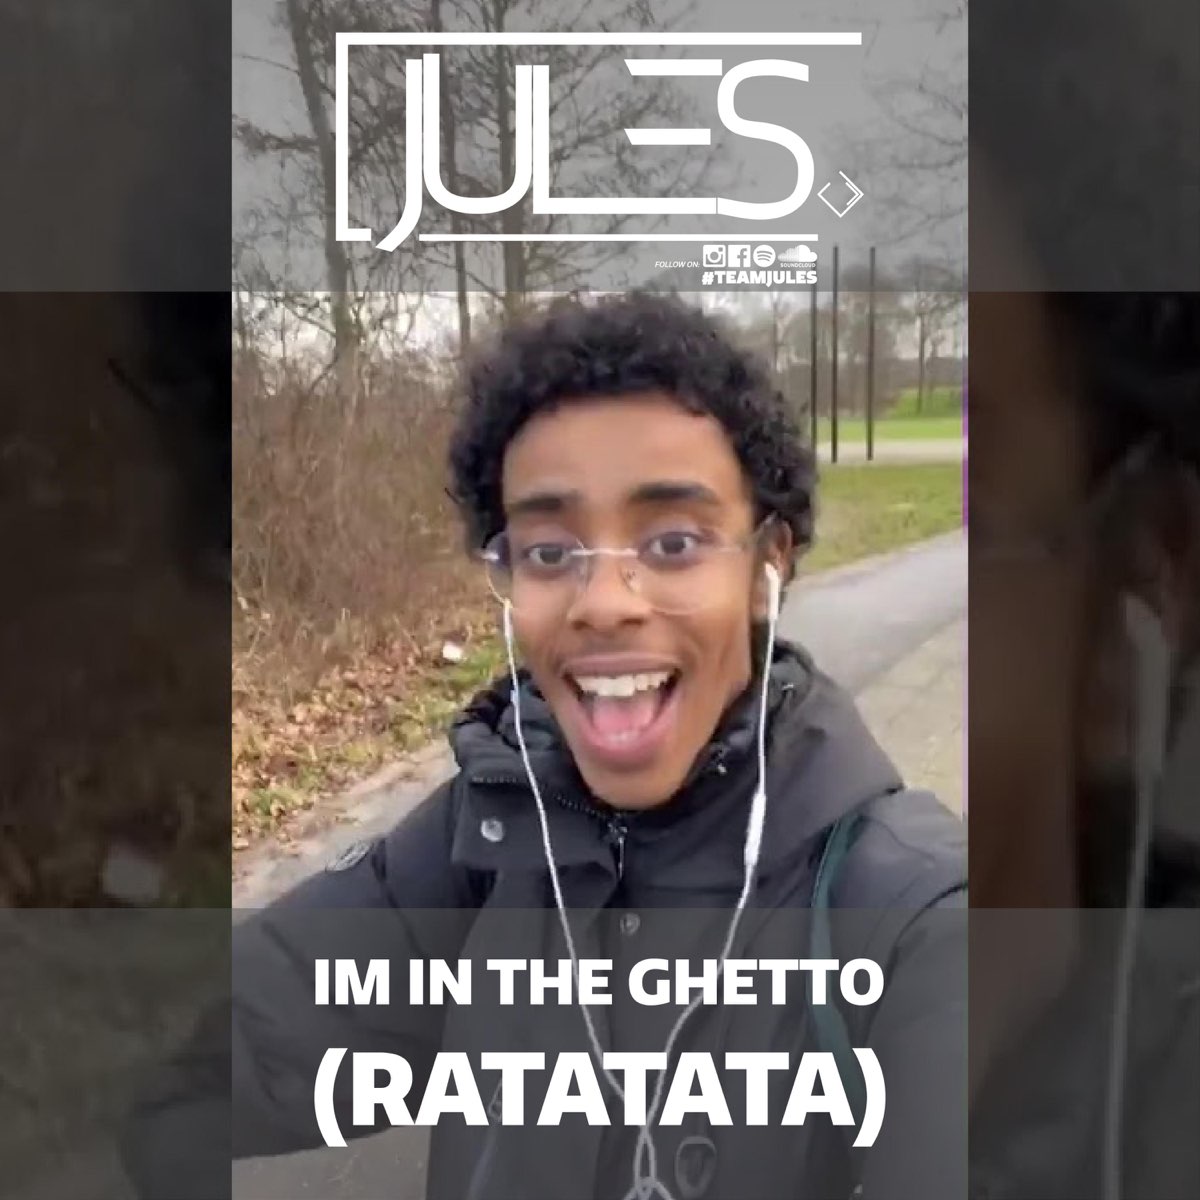 I'm In The Ghetto (Ratatata) - Single by JULES on Apple Music